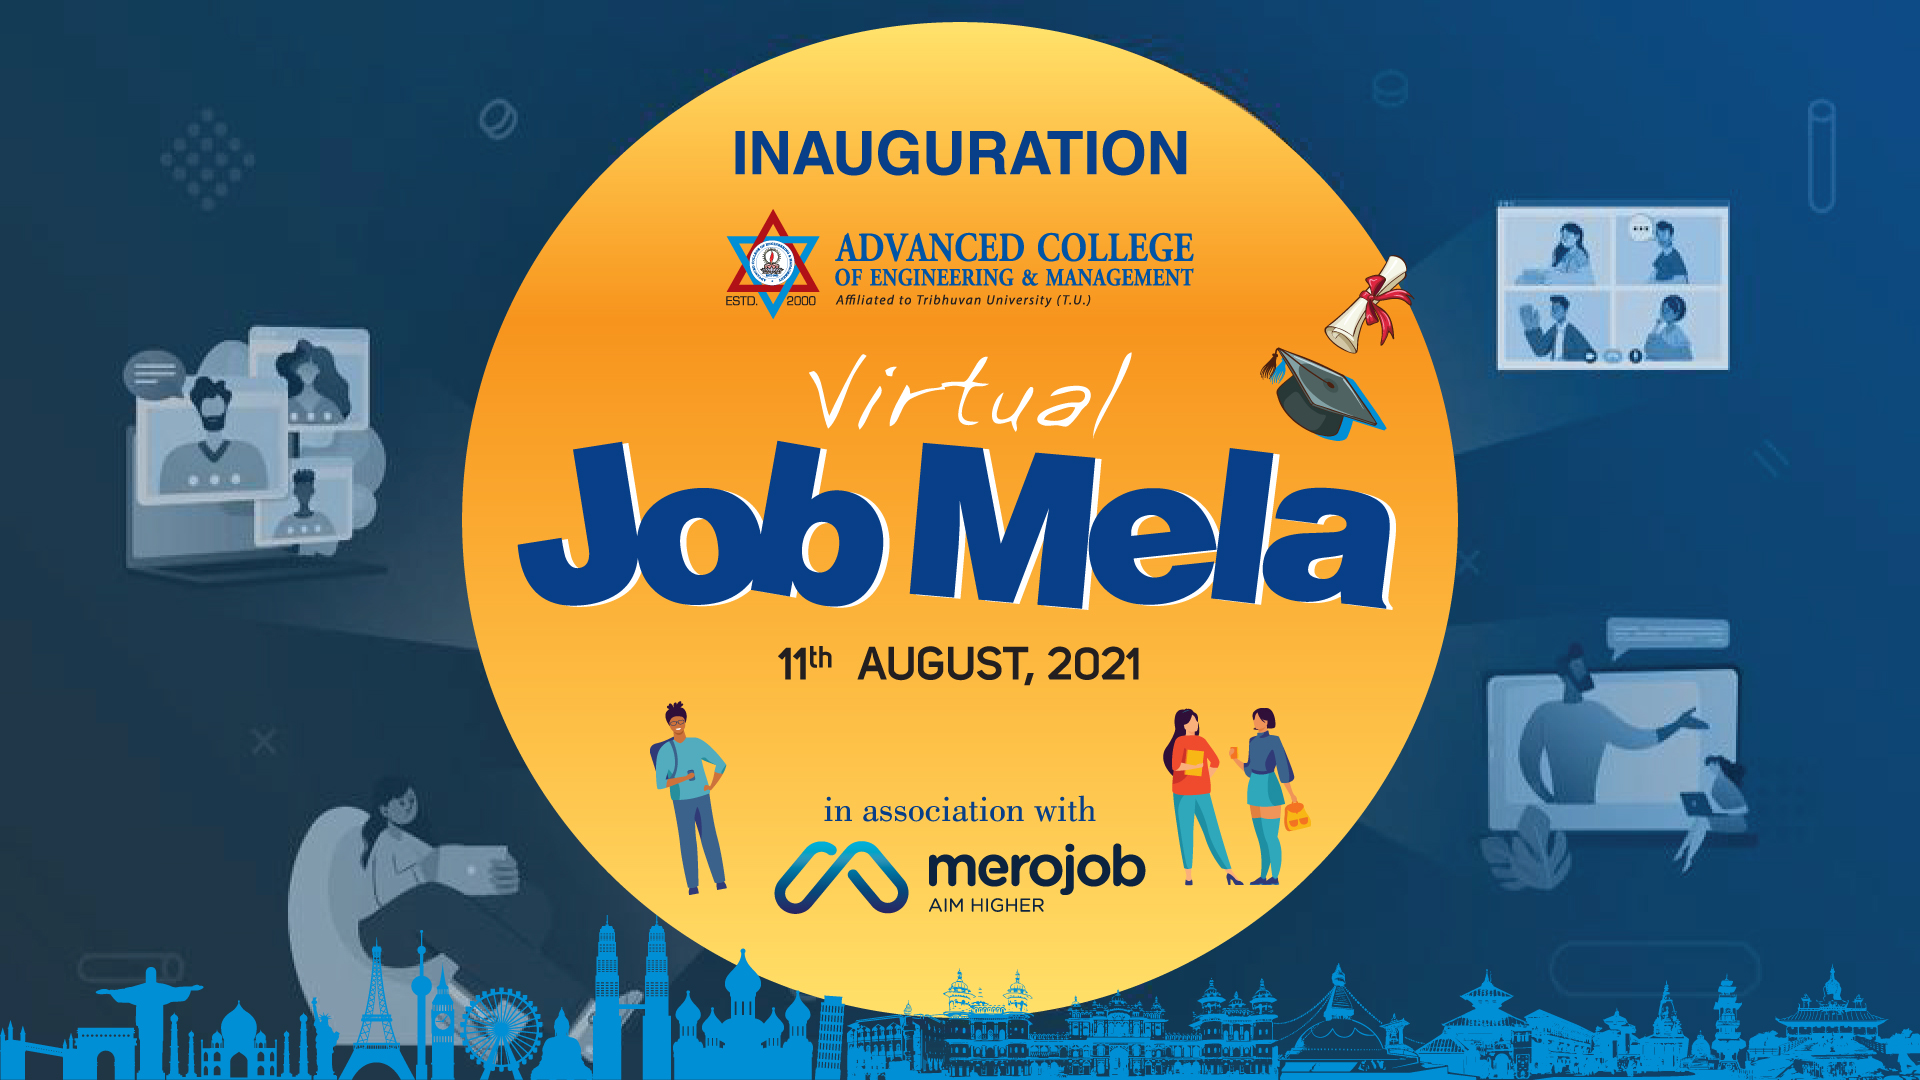 Advanced Engineering College Organized a Virtual Job Mela: an Online Fair for Job Placement and Skill Development